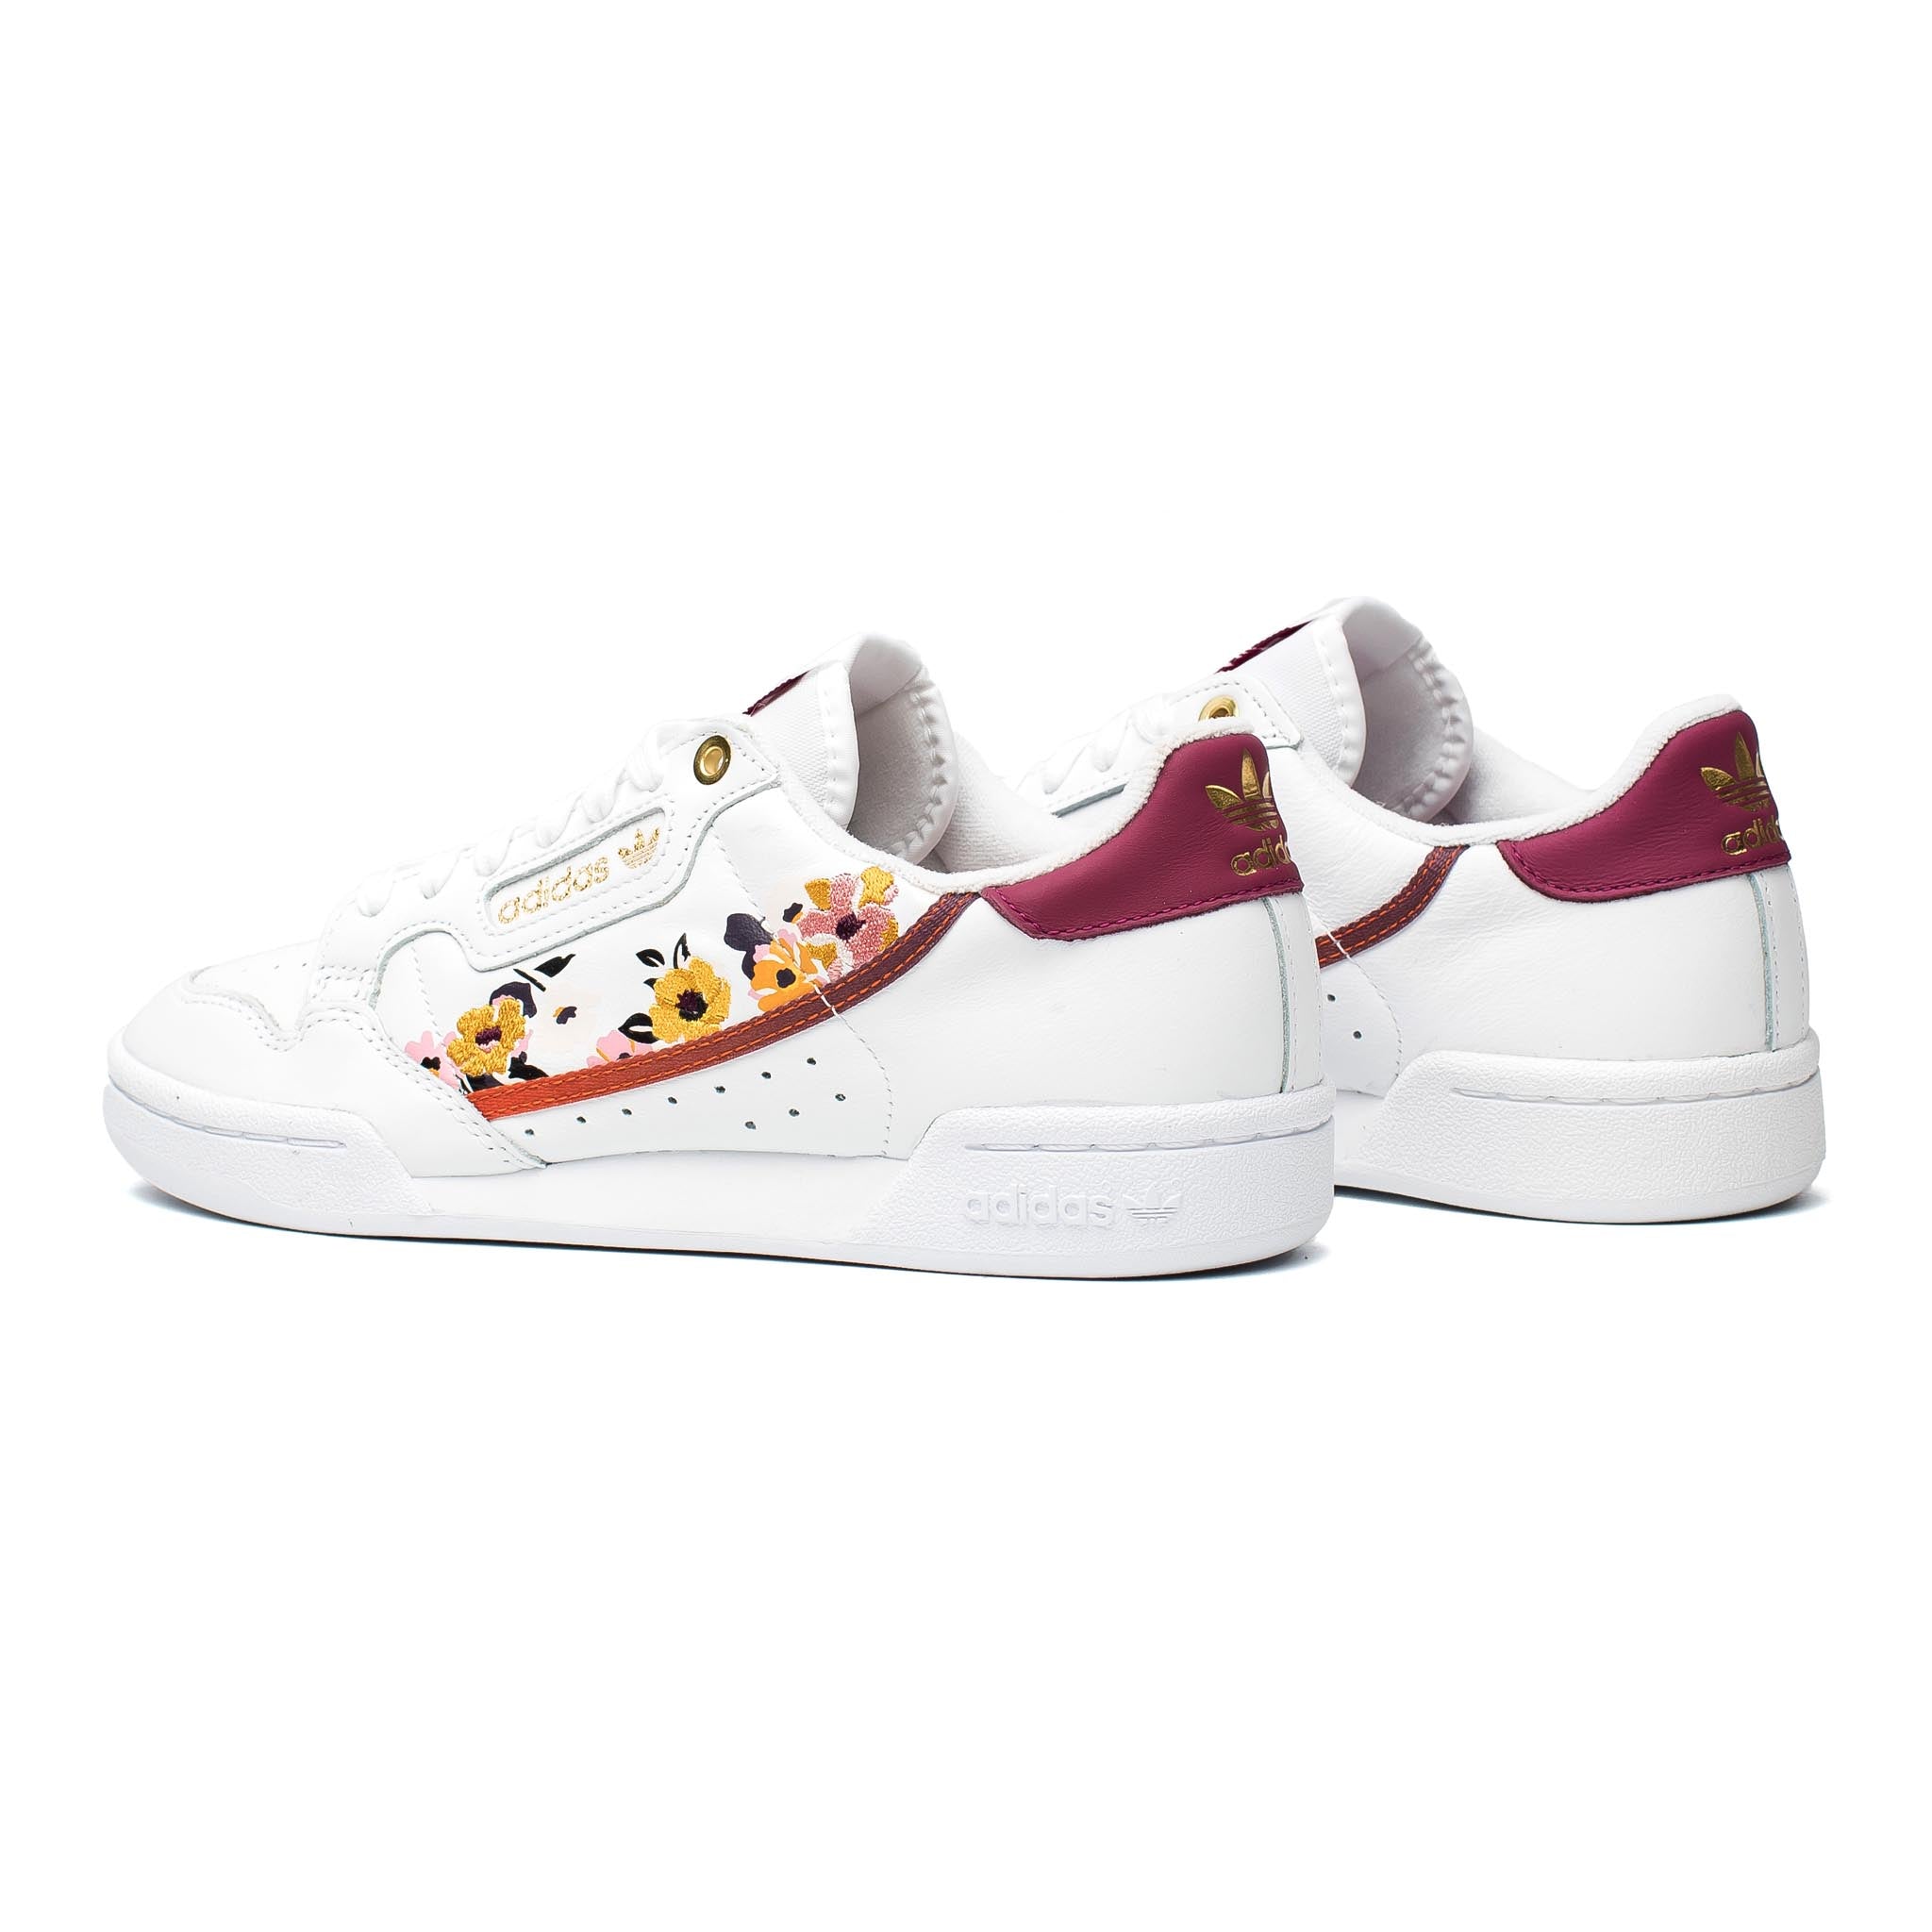 ADIDAS x HER Studio London Continental 80 Cloud White/Power Berry